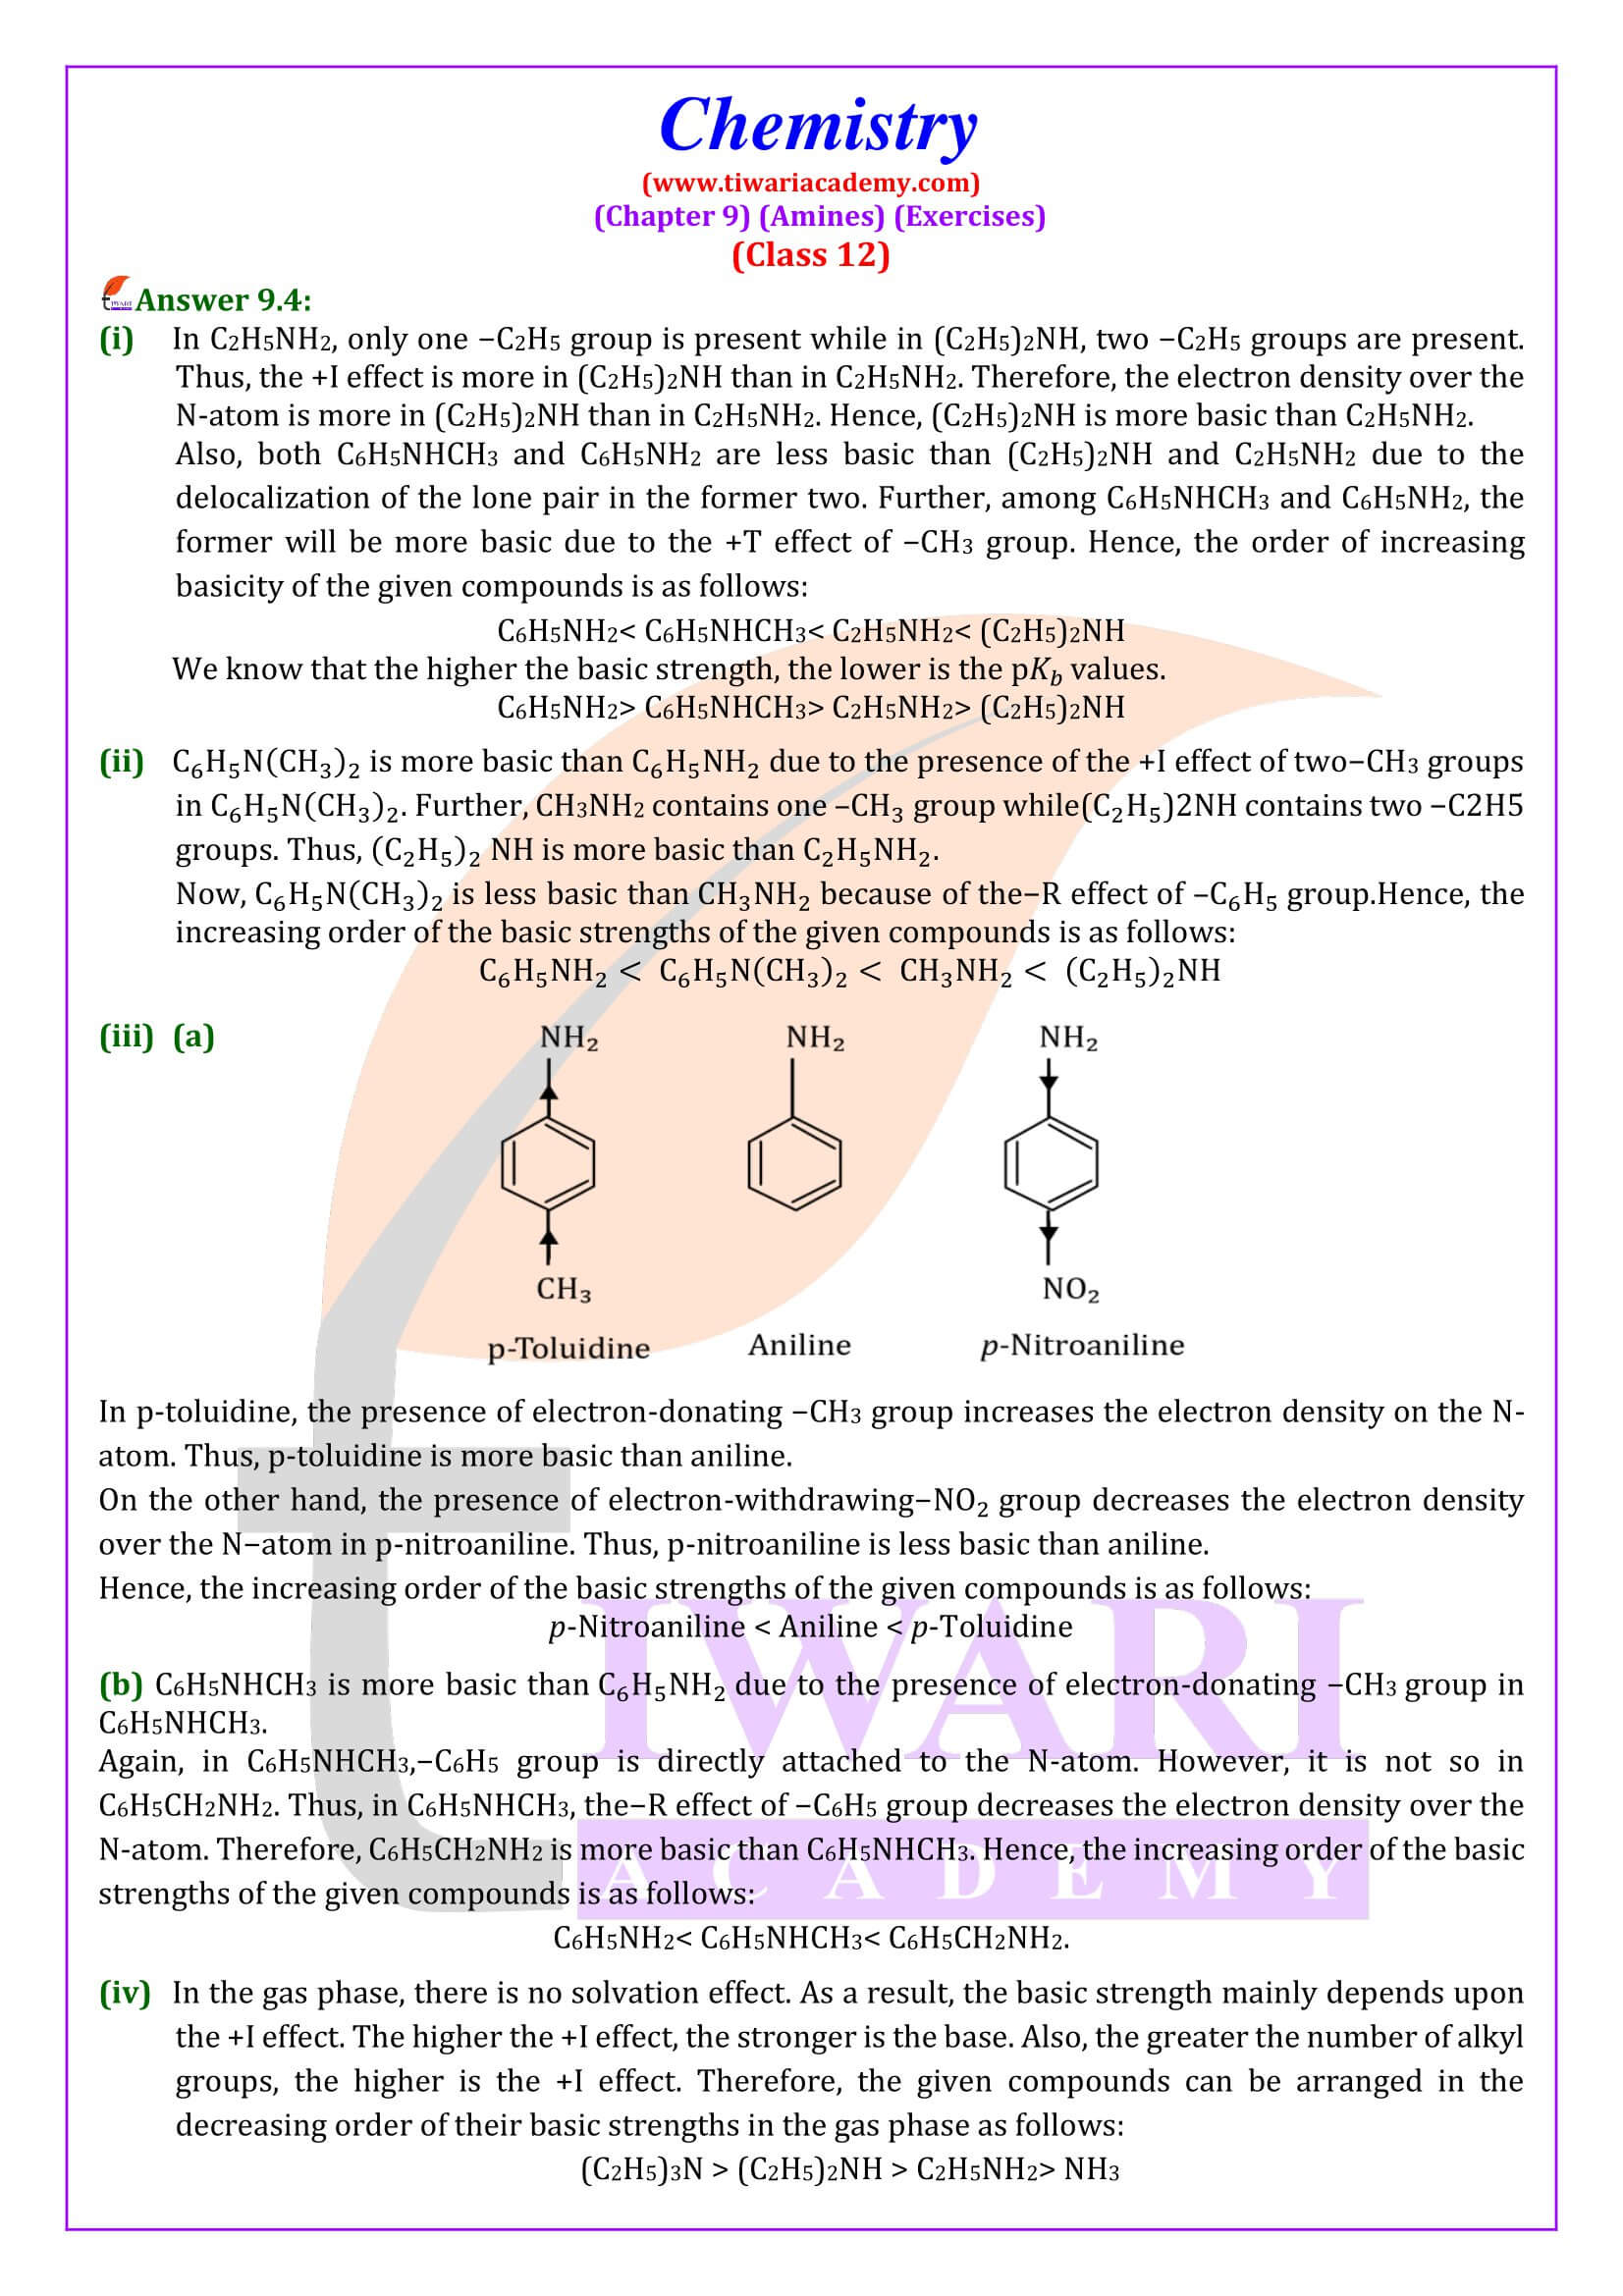 NCERT Solutions for Class 12 Chemistry Chapter 9 Exercises